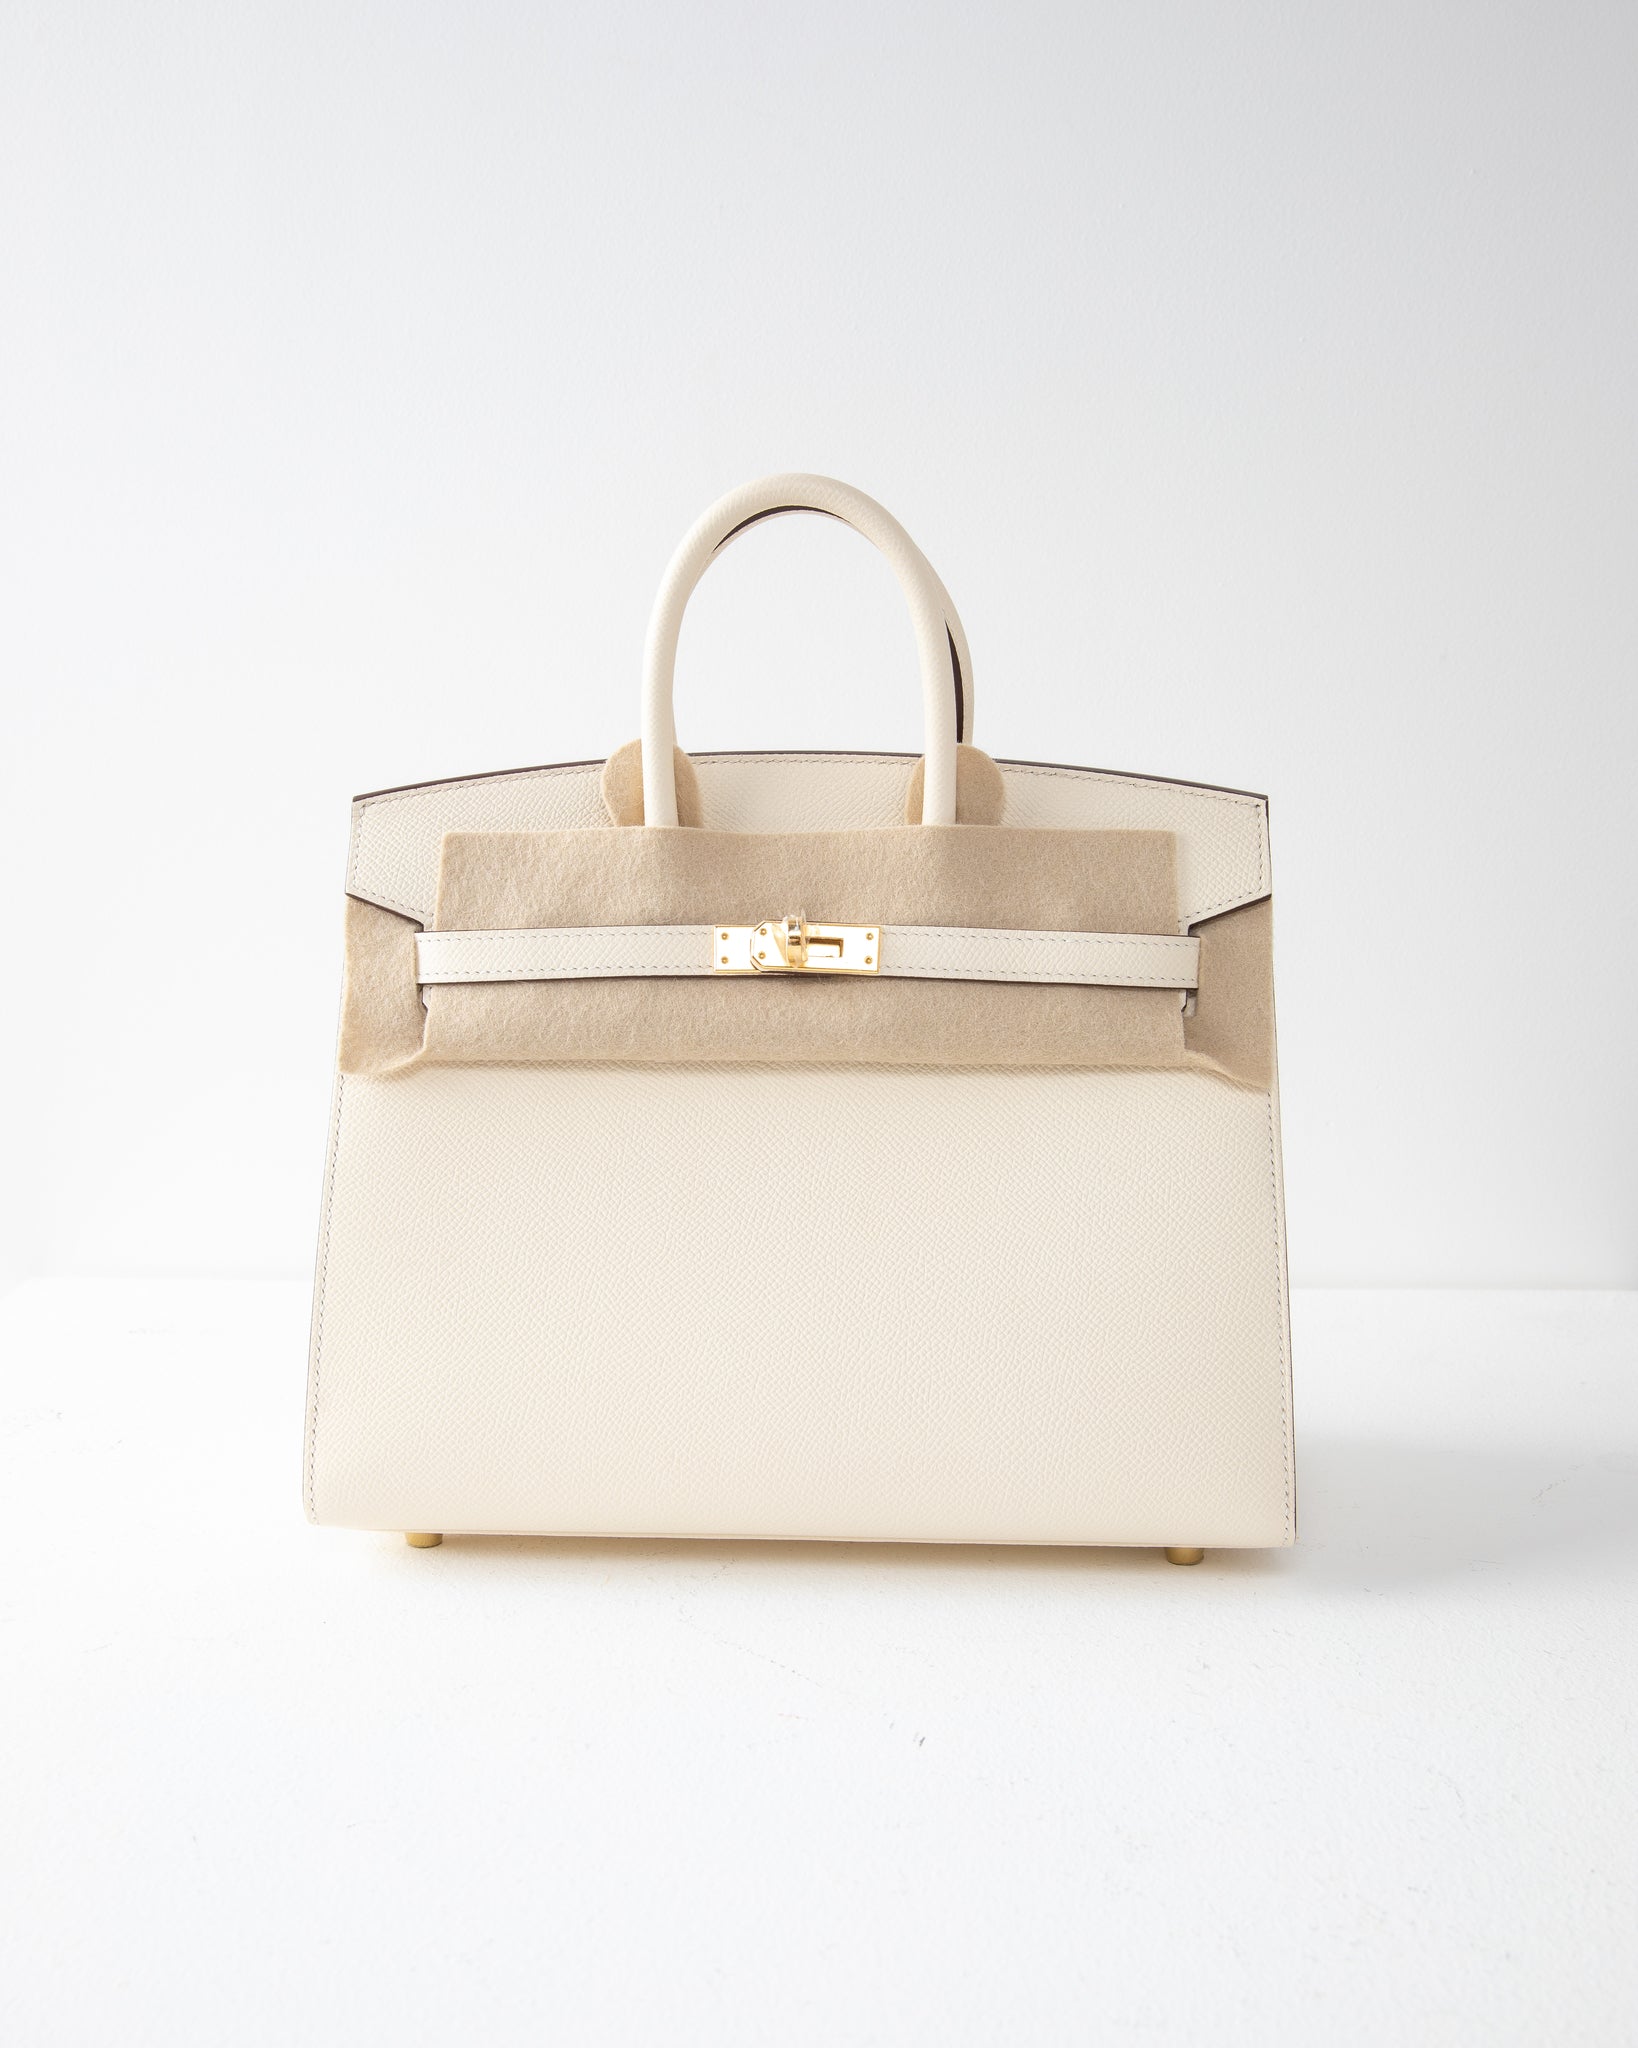 A NATA EPSOM LEATHER SELLIER BIRKIN 25 WITH GOLD HARDWARE